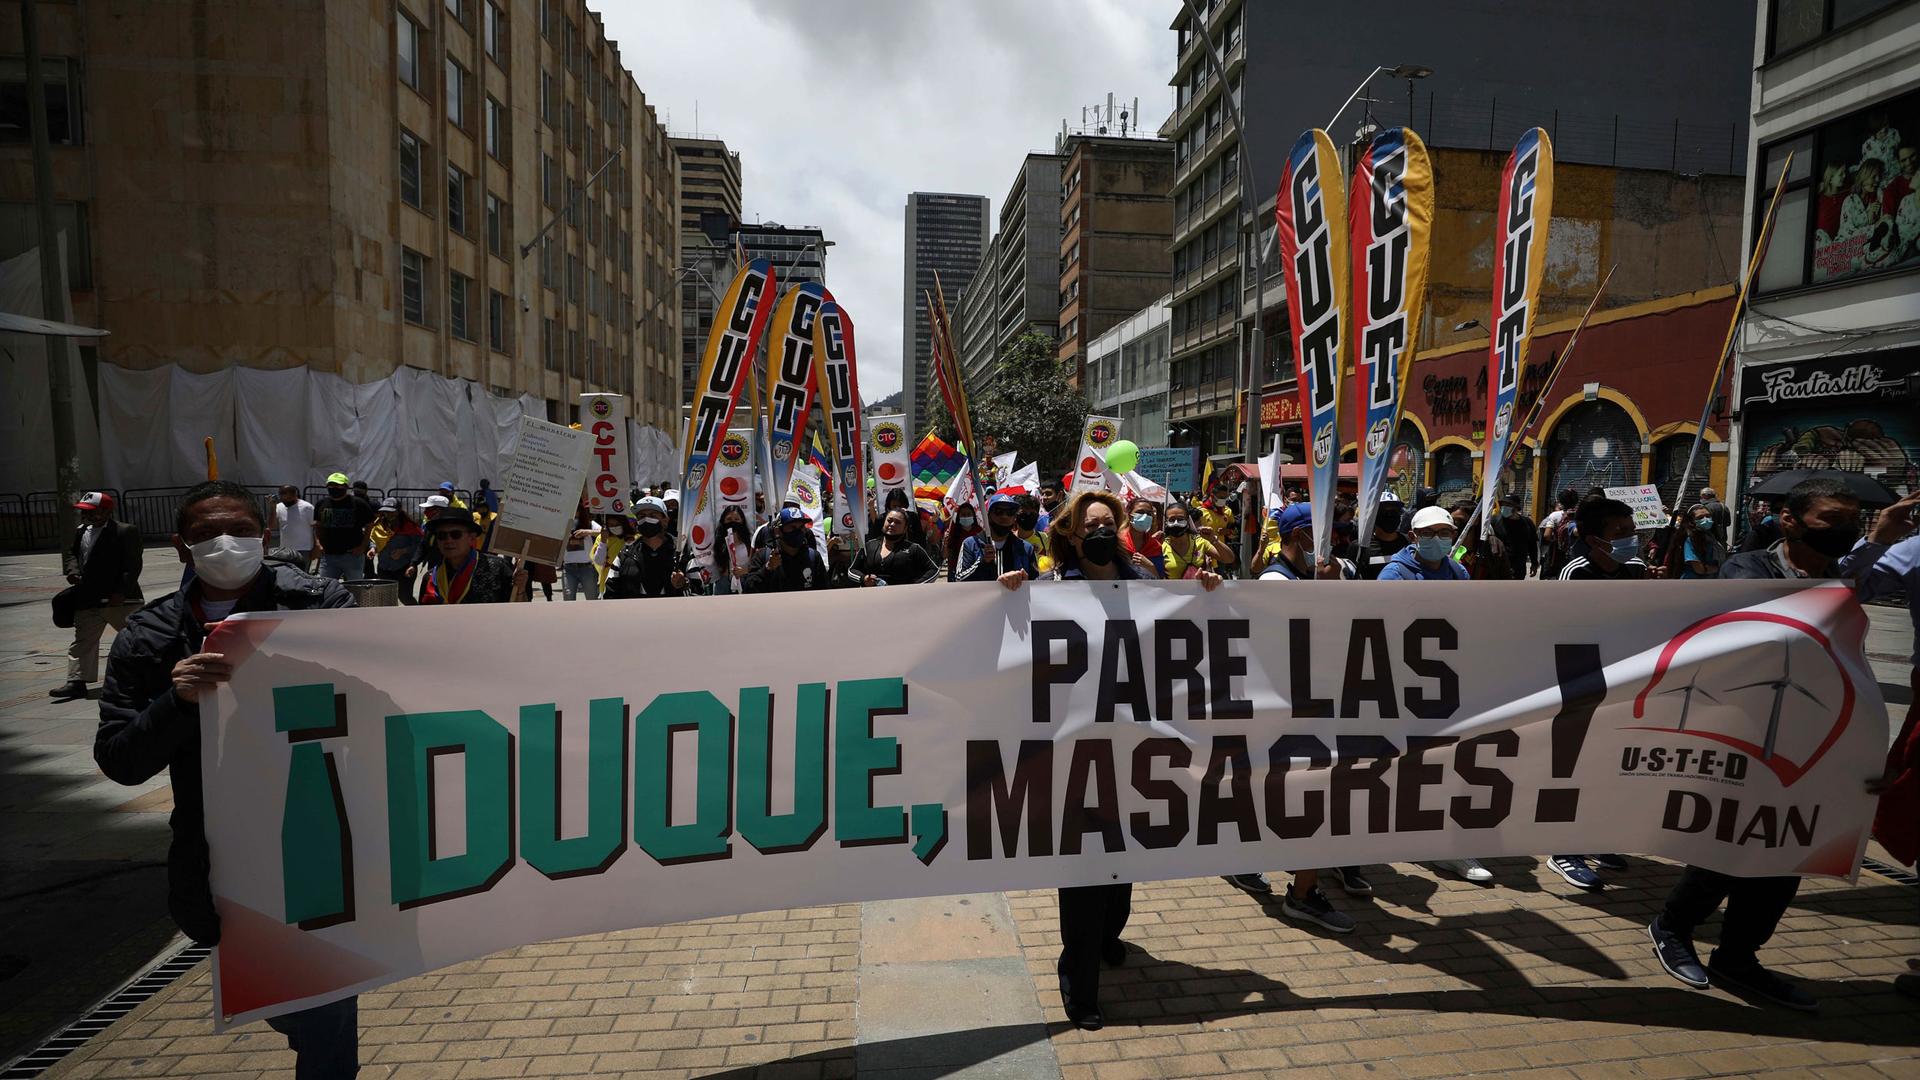 Protesters hold a banner with a message that reads in Spanish: "Duque, stop the massacres," directed at Colombia's President Ivan Duque, as they march to Bolivar Square in Bogotá, Colombia, Wednesday, May 12, 2021.